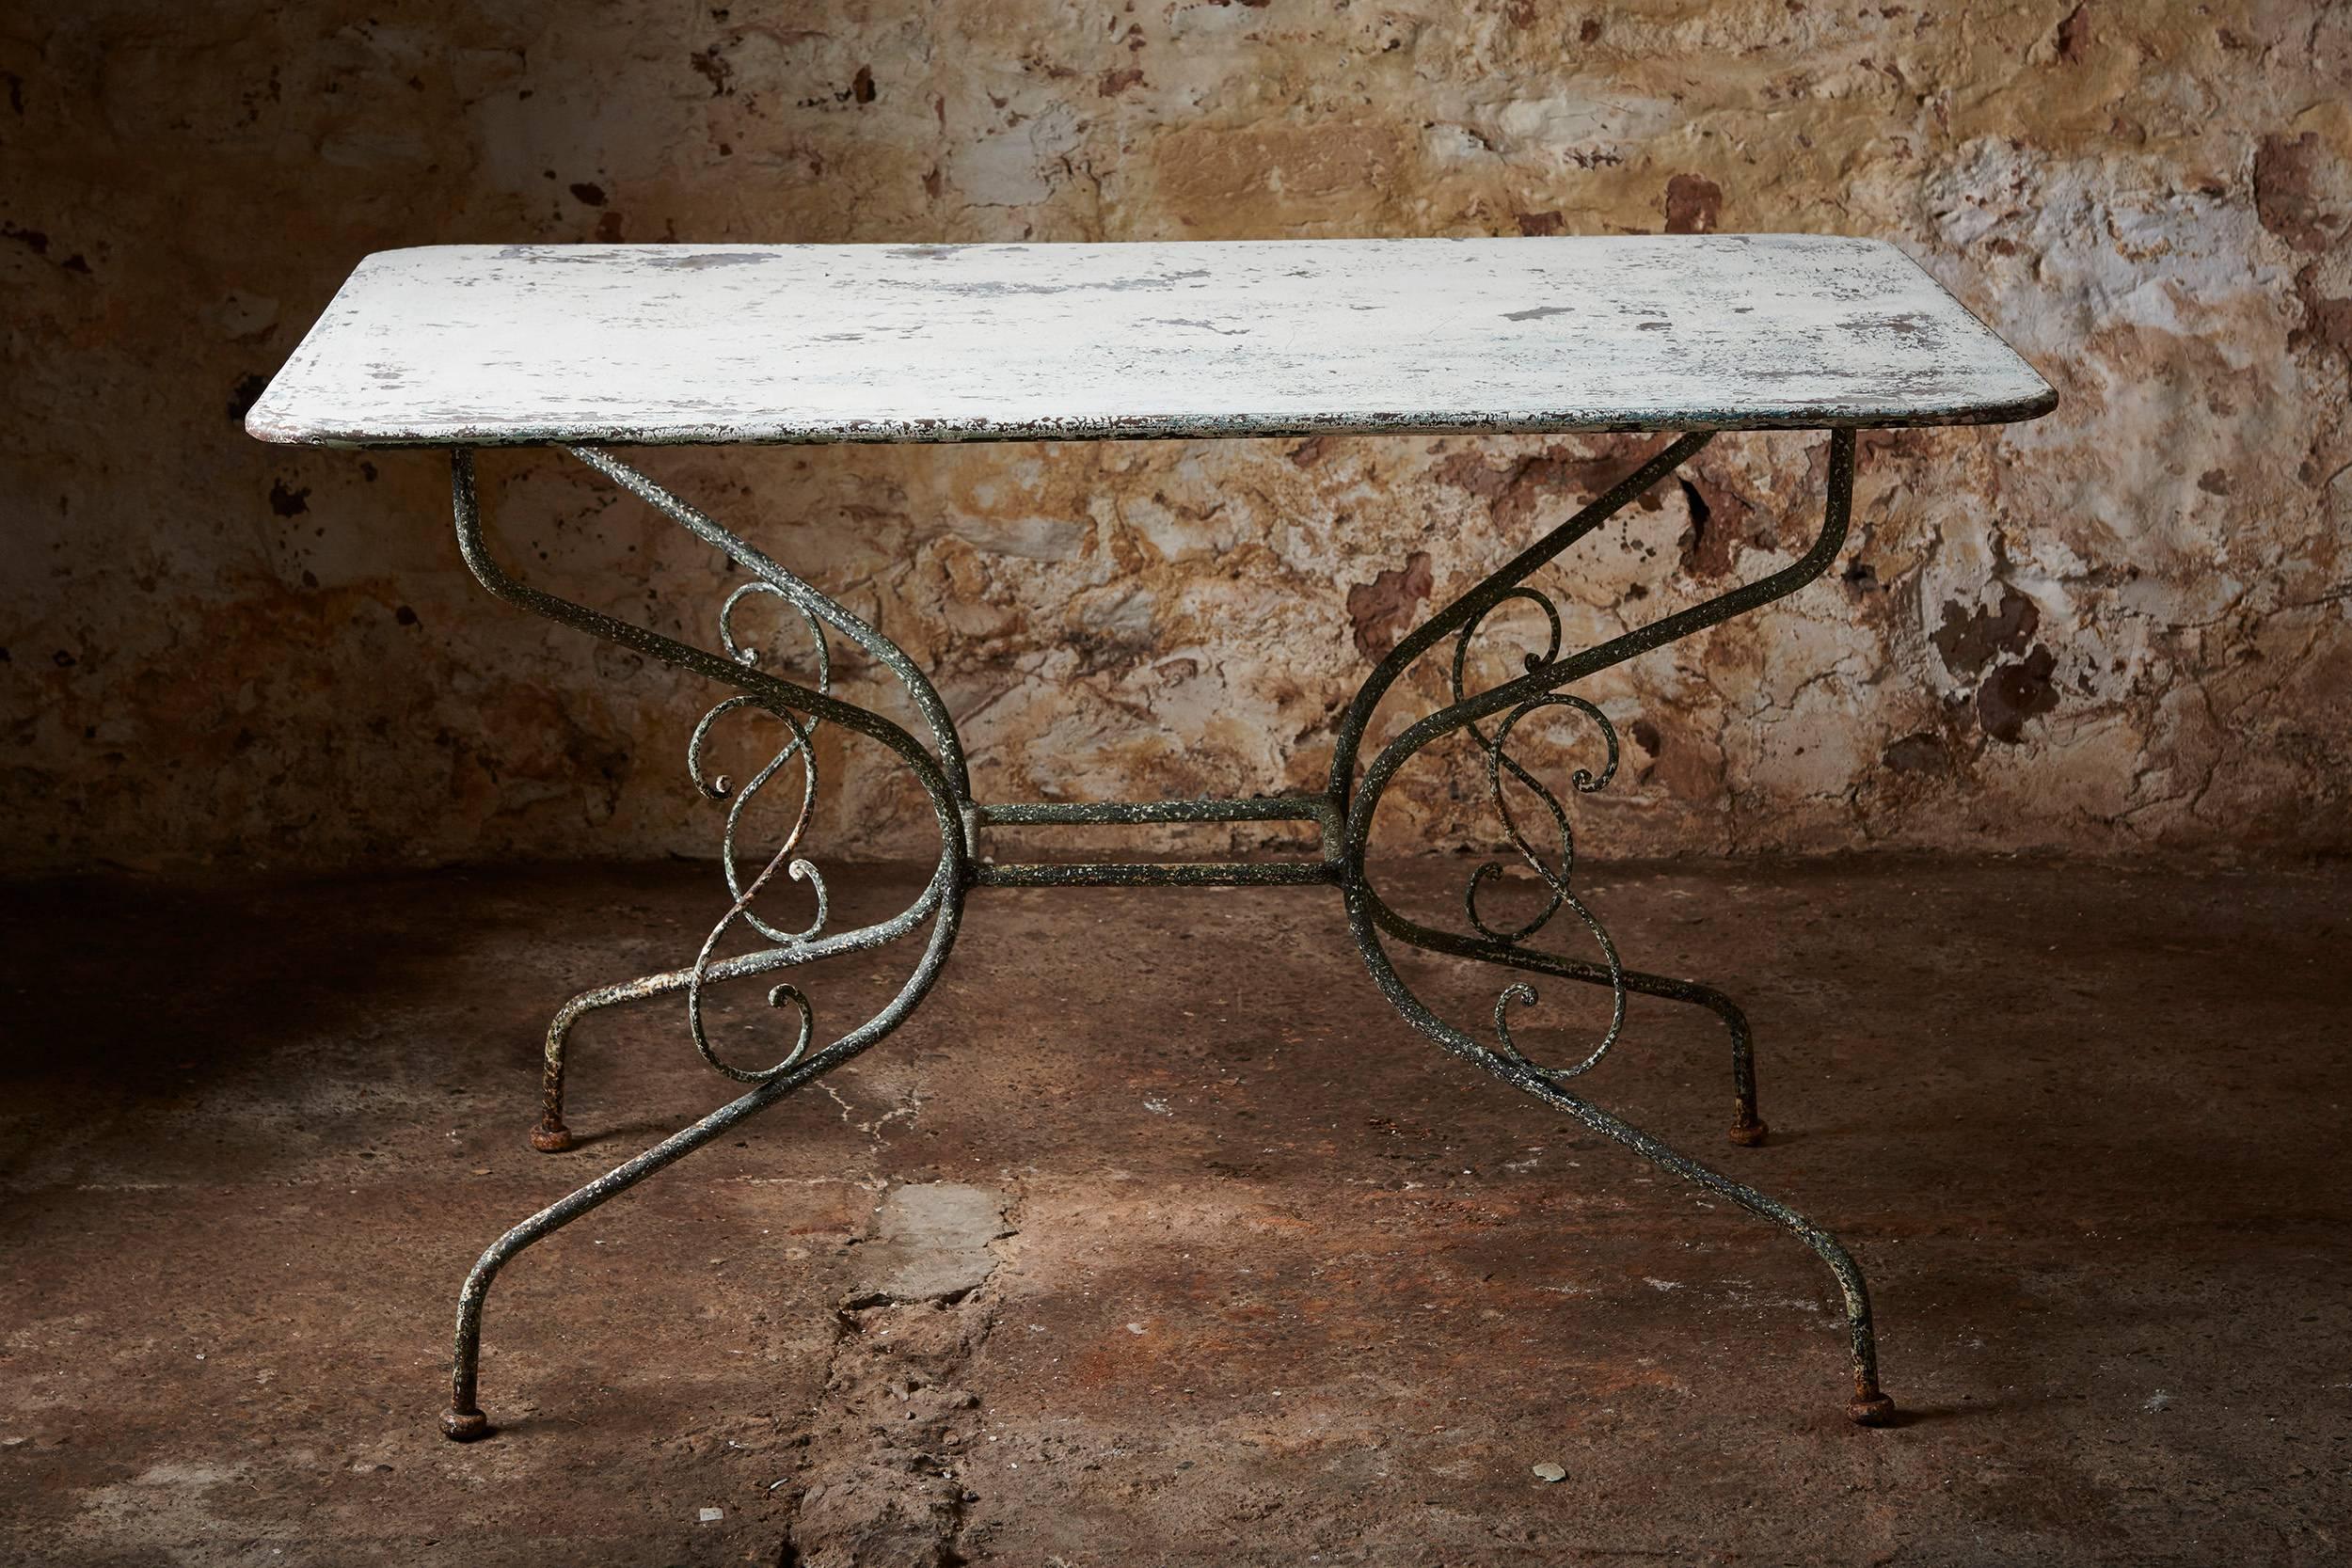 A stunning 19th century dining table, with its original painted patina. The loose and flaking paint was removed to reveal the earlier painted metal top. The frame is hand-forged, with elegant scrolls.

We found the appealing little dining table in